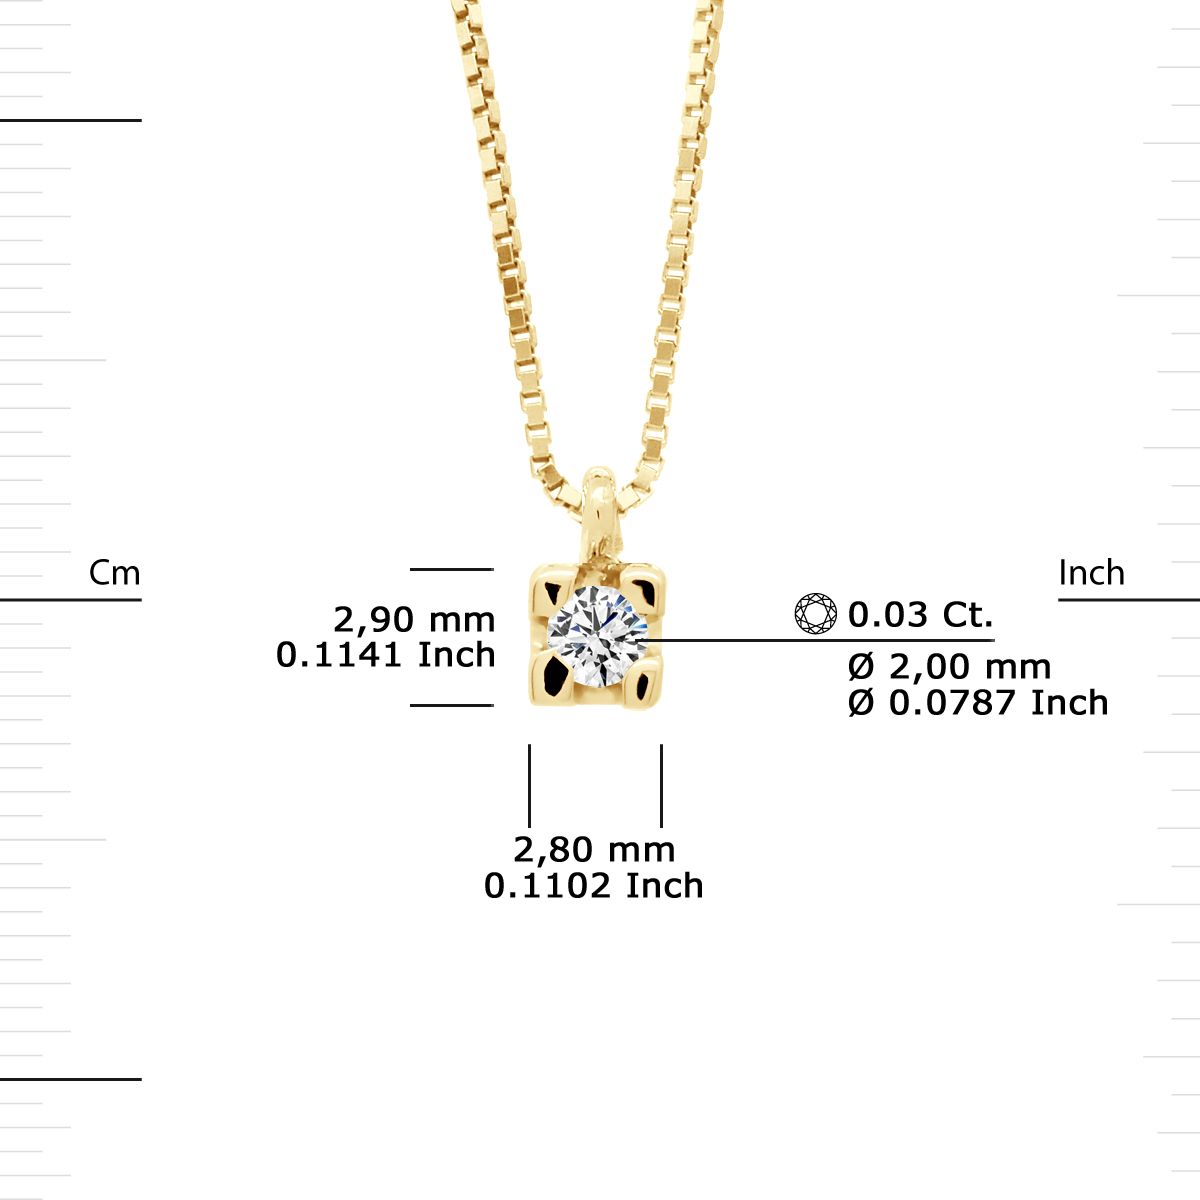 Necklace Solitaire - Diamonds 0,03 Cts - HSI Quality - Venetian Style chain Gold - Length 42 cm, 16,5 in - Our jewellery is made in France and will be delivered in a gift box accompanied by a Certificate of Authenticity and International Warranty